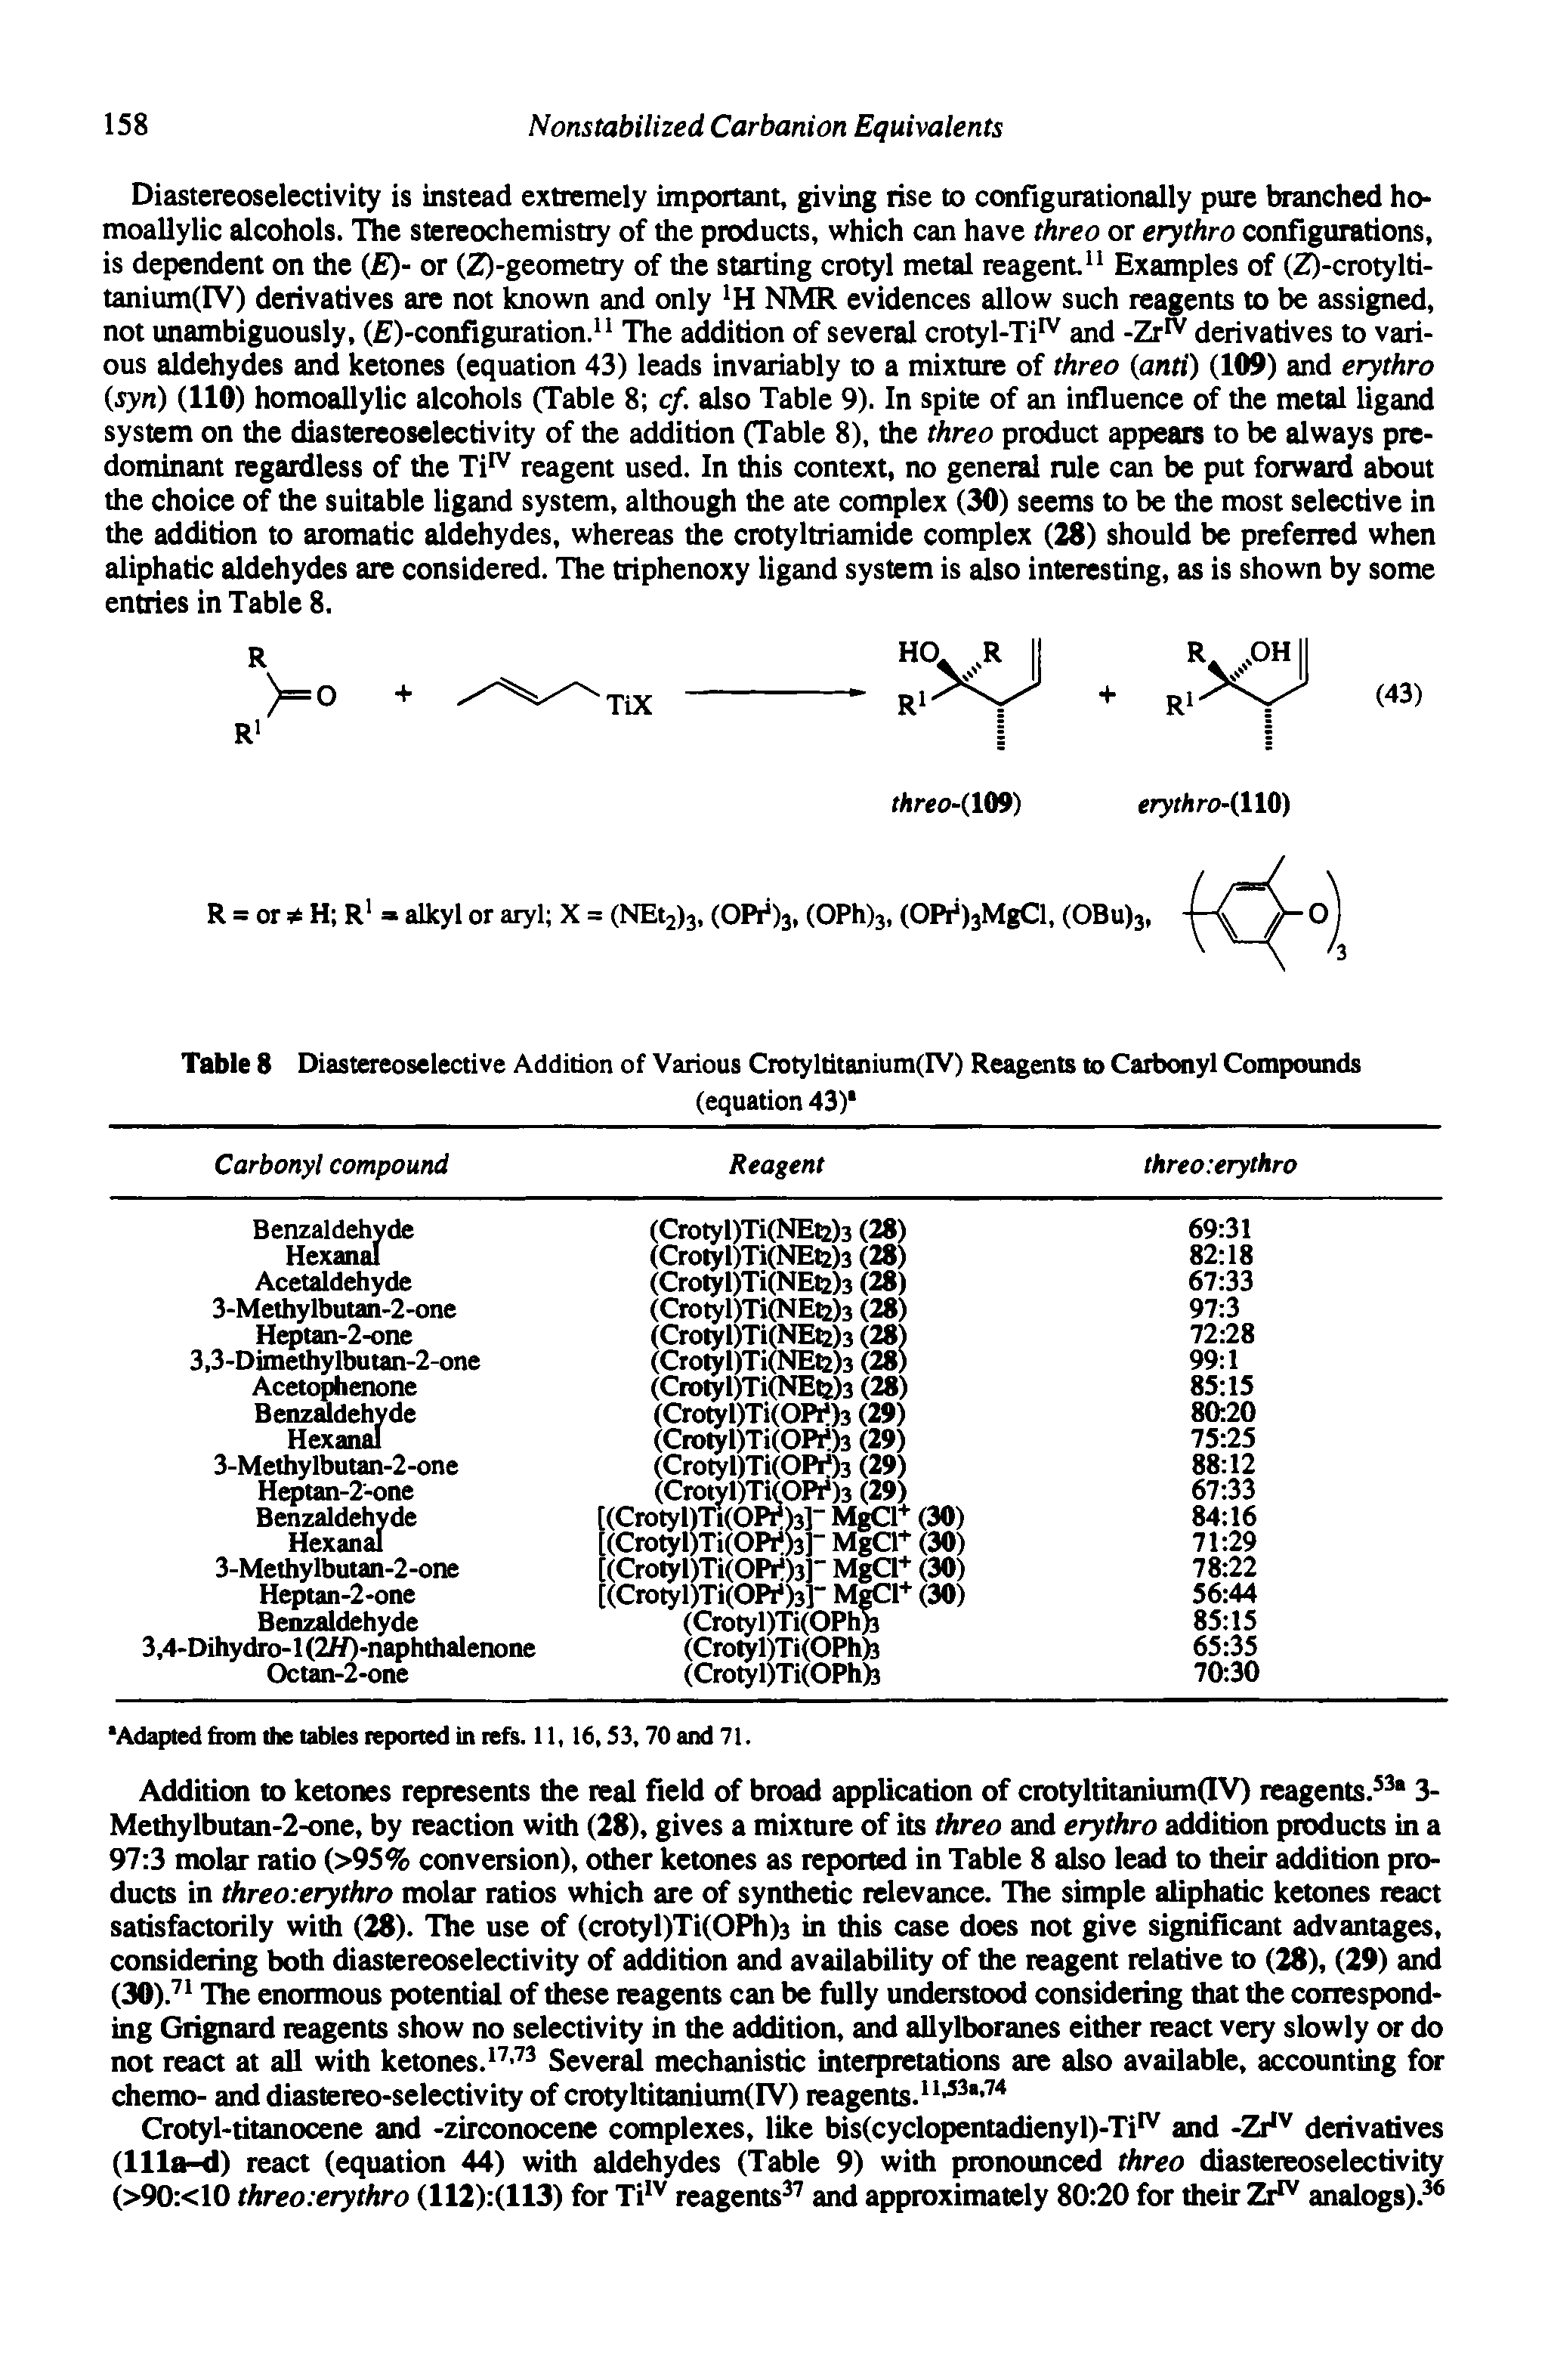 Table 8 Diastereoselective Addition of Various Crotyltitanium(IV) Reagents to Carbonyl Compounds...